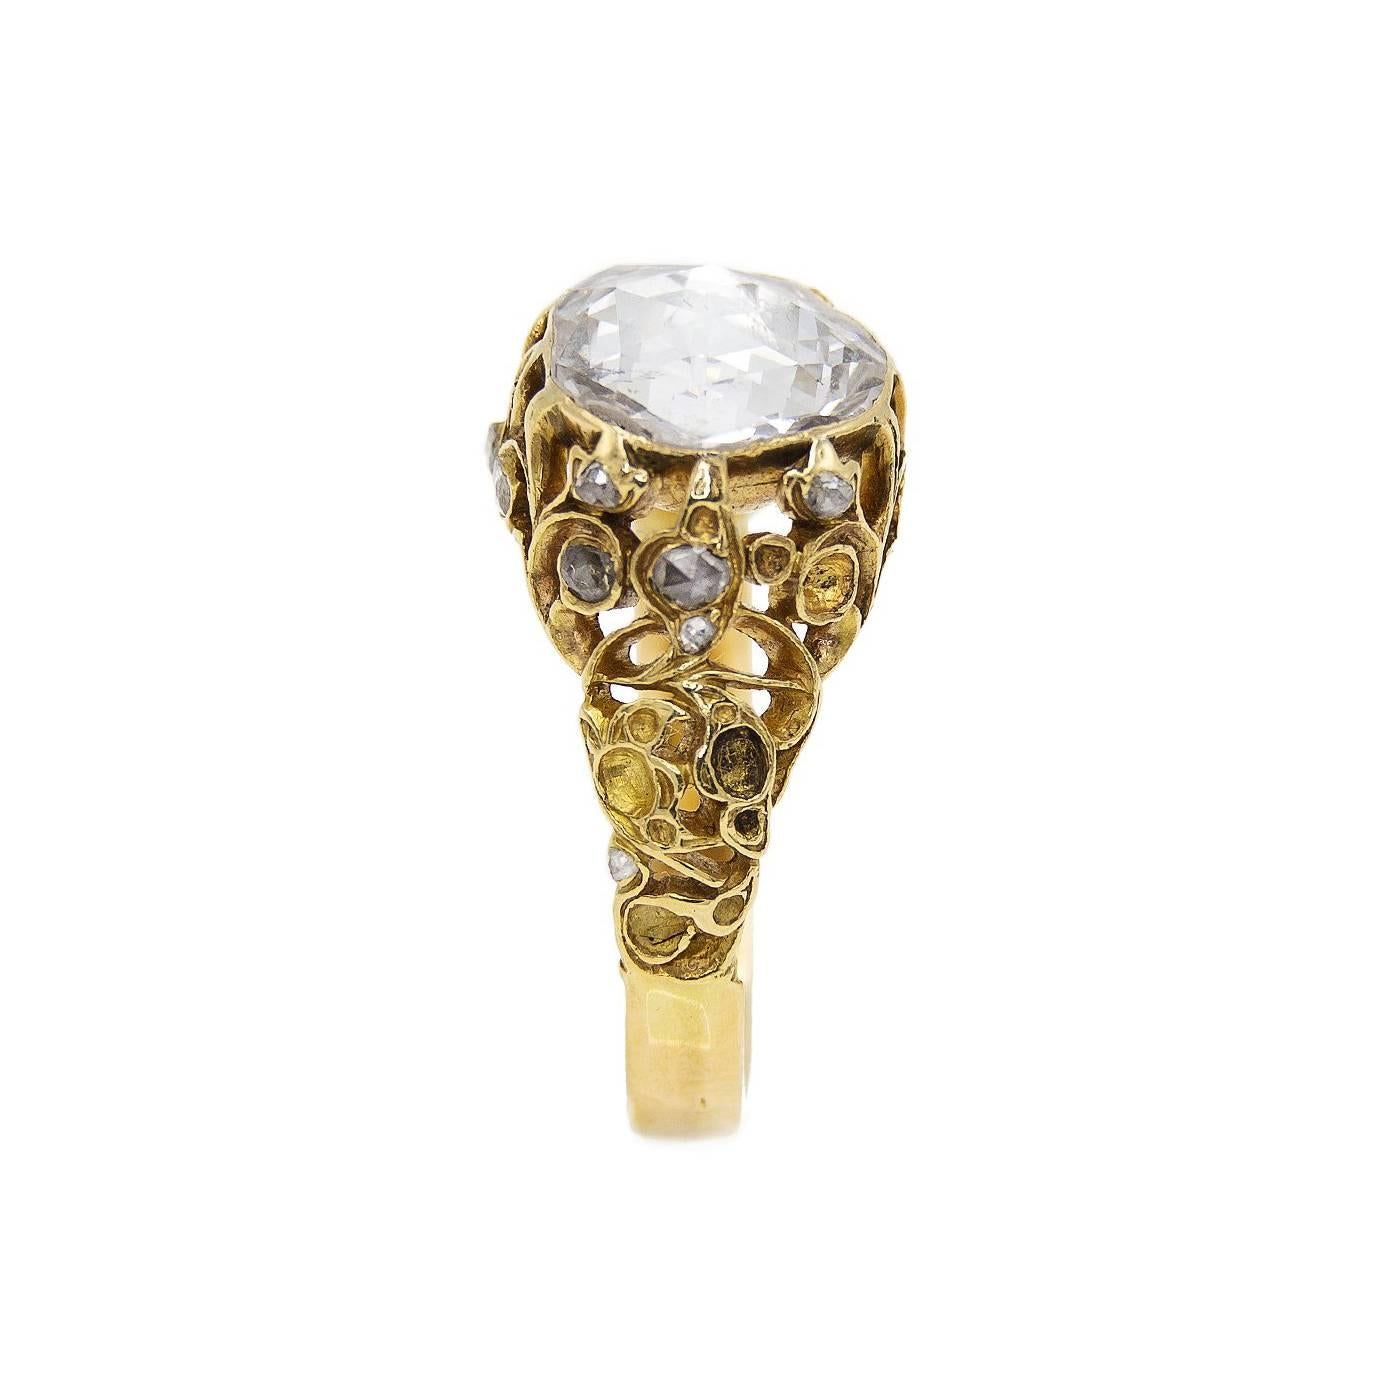  It has delicately floral carvings that hold this stunning diamond in place sprinkled with a multitude of accent diamonds. The center diamond is approximately 2.7 carats. This ring is from the French Victorian era of romance and opulence. It is